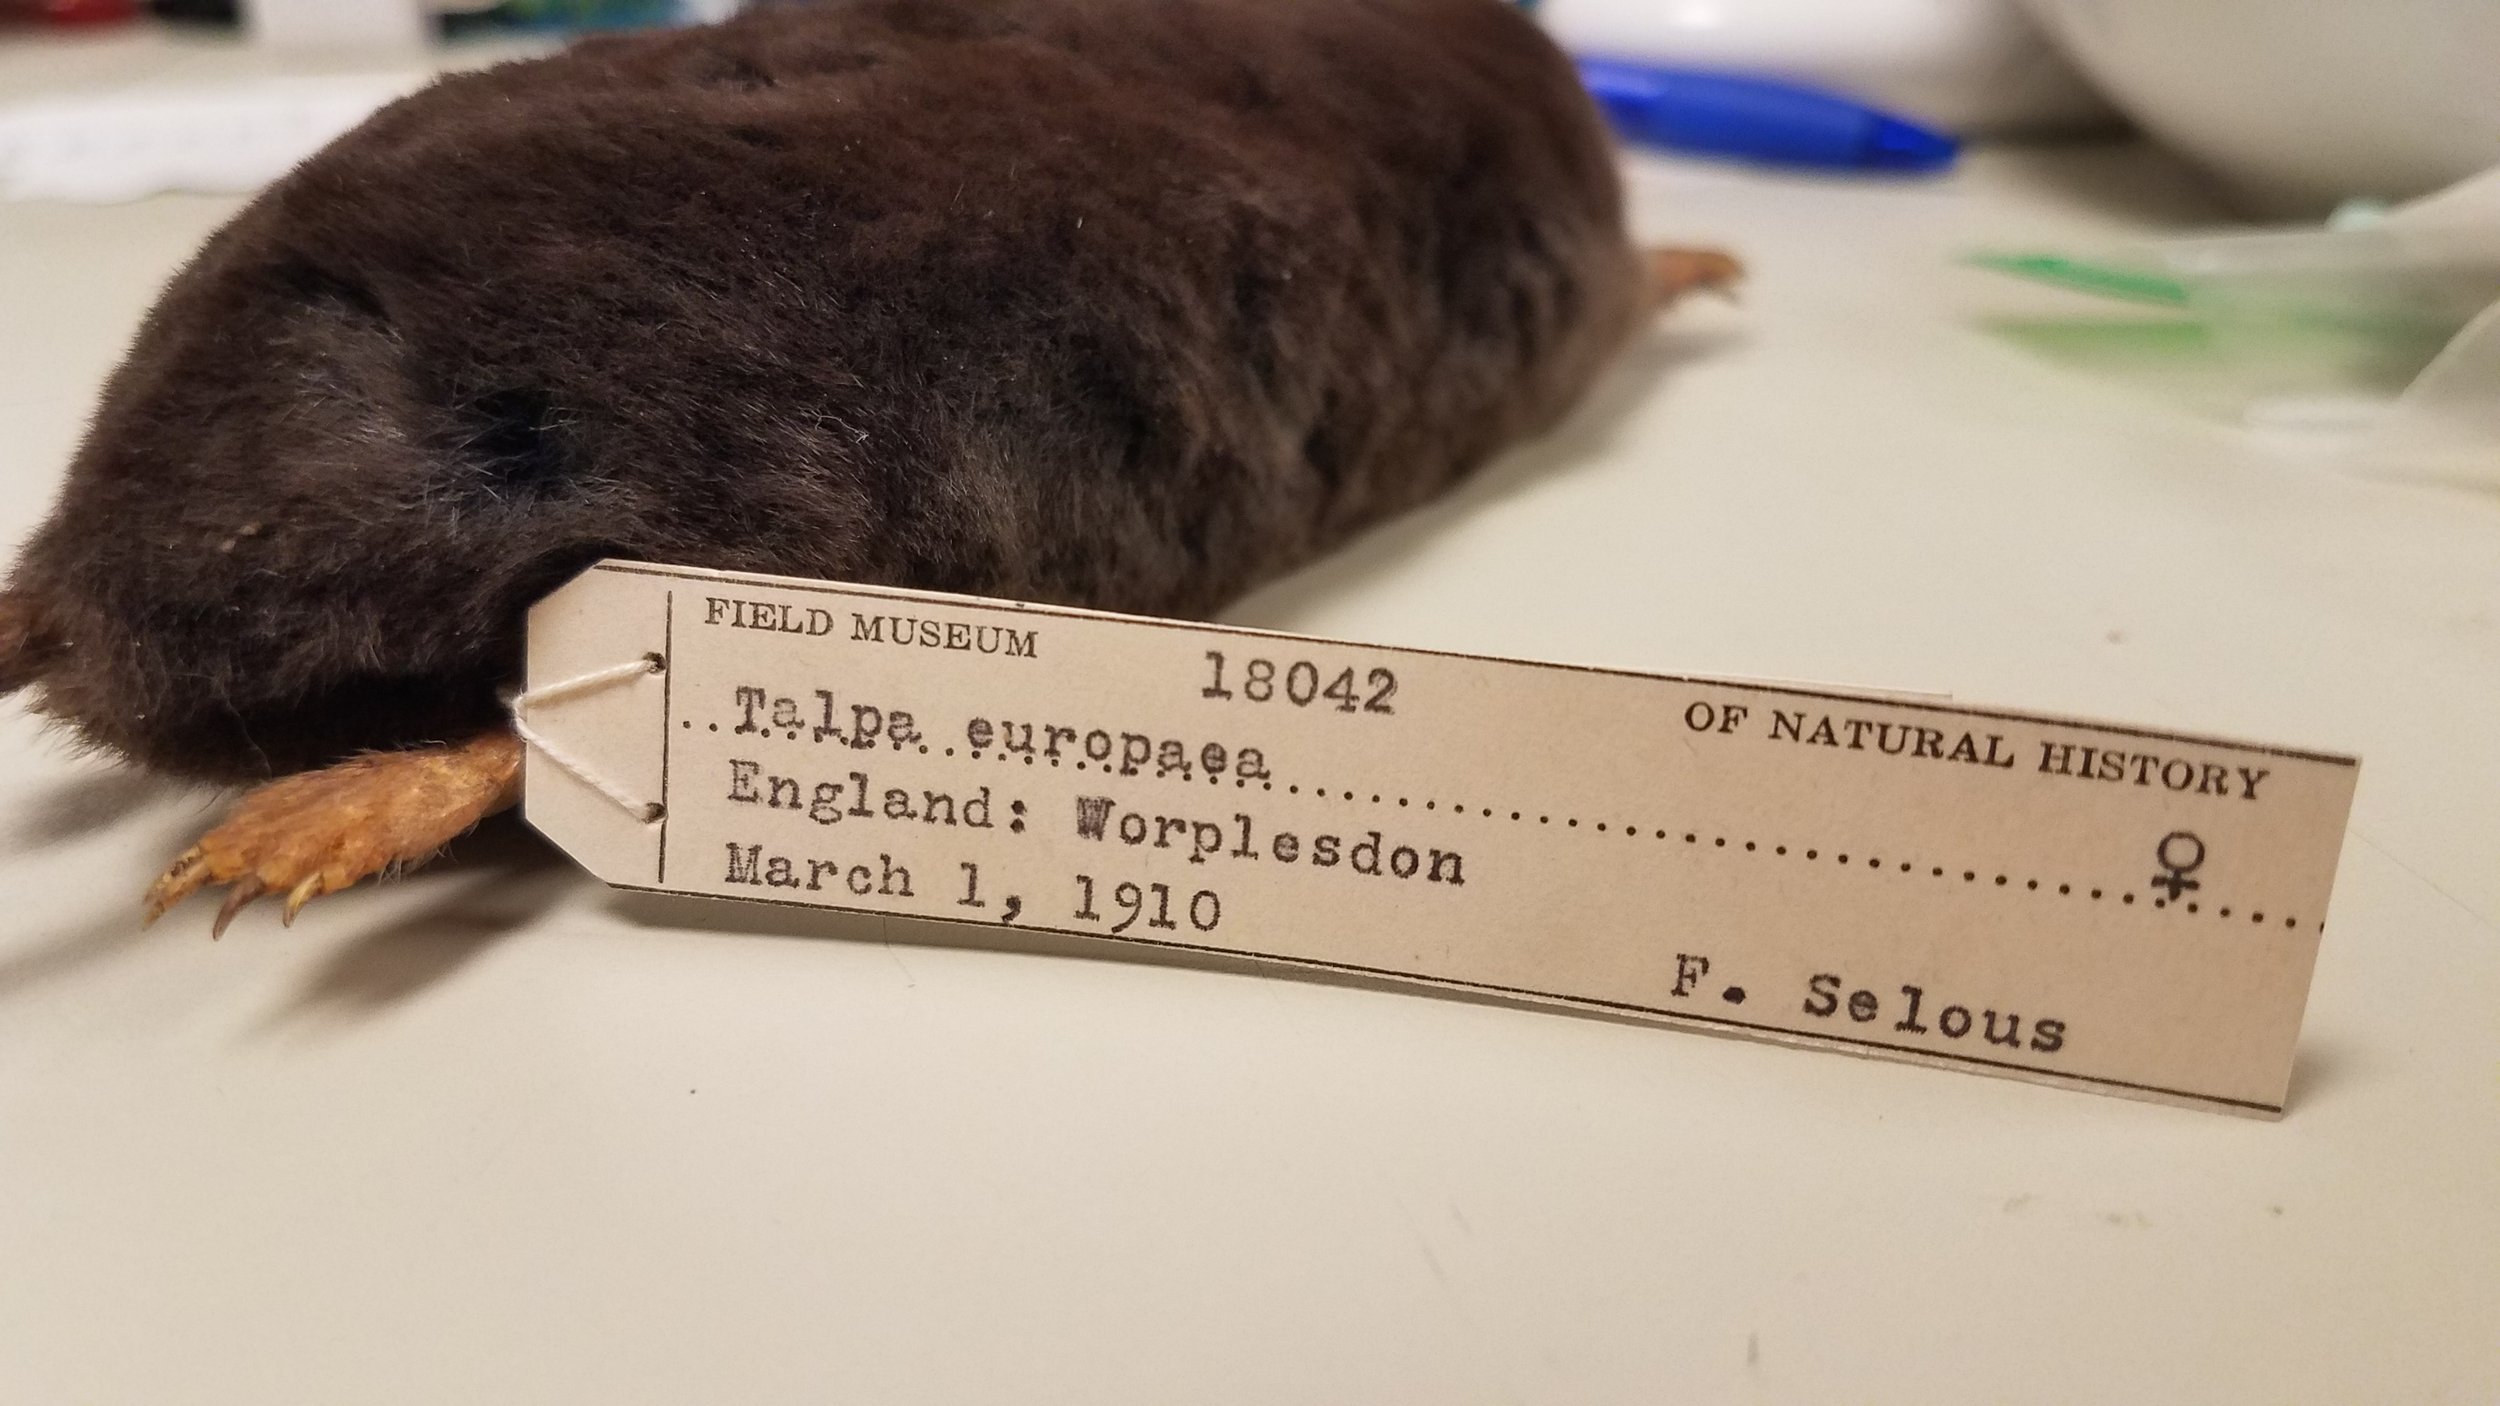  This specimen is from 1910 - over 100 years old! Natural history collections made this mole a perpetual ambassador for its species. 